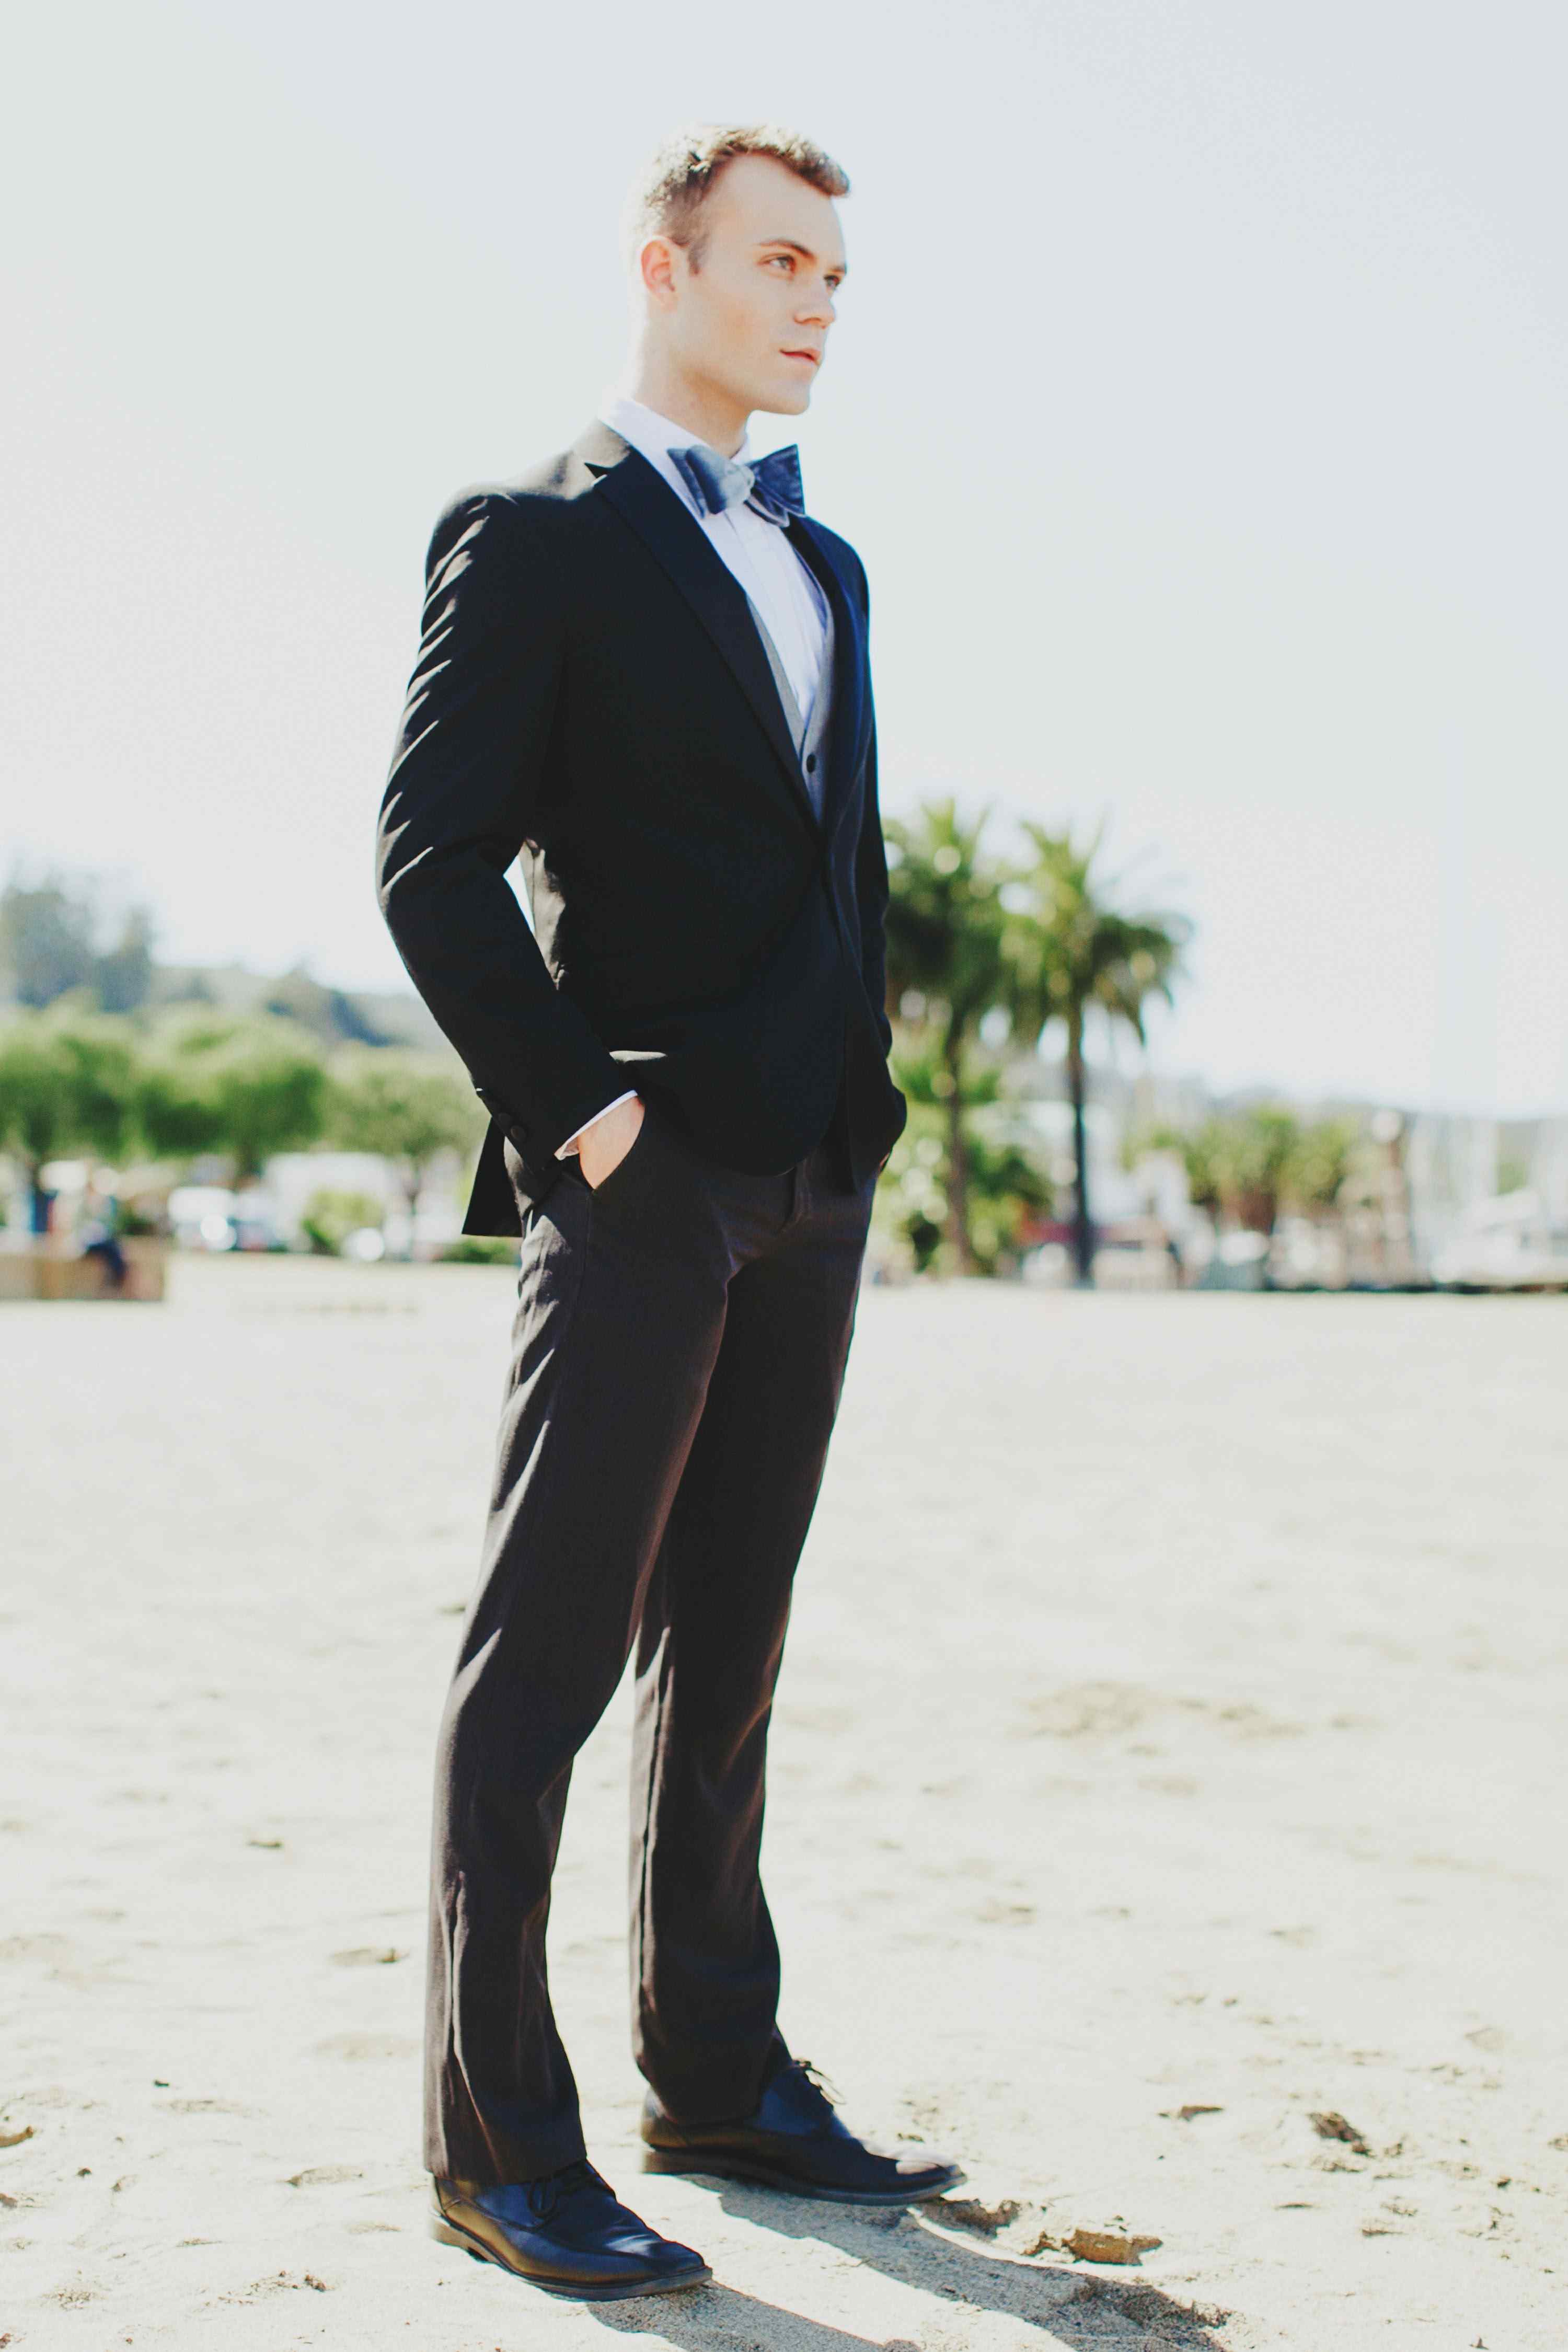 Jonathan Cottrell modeling a suit